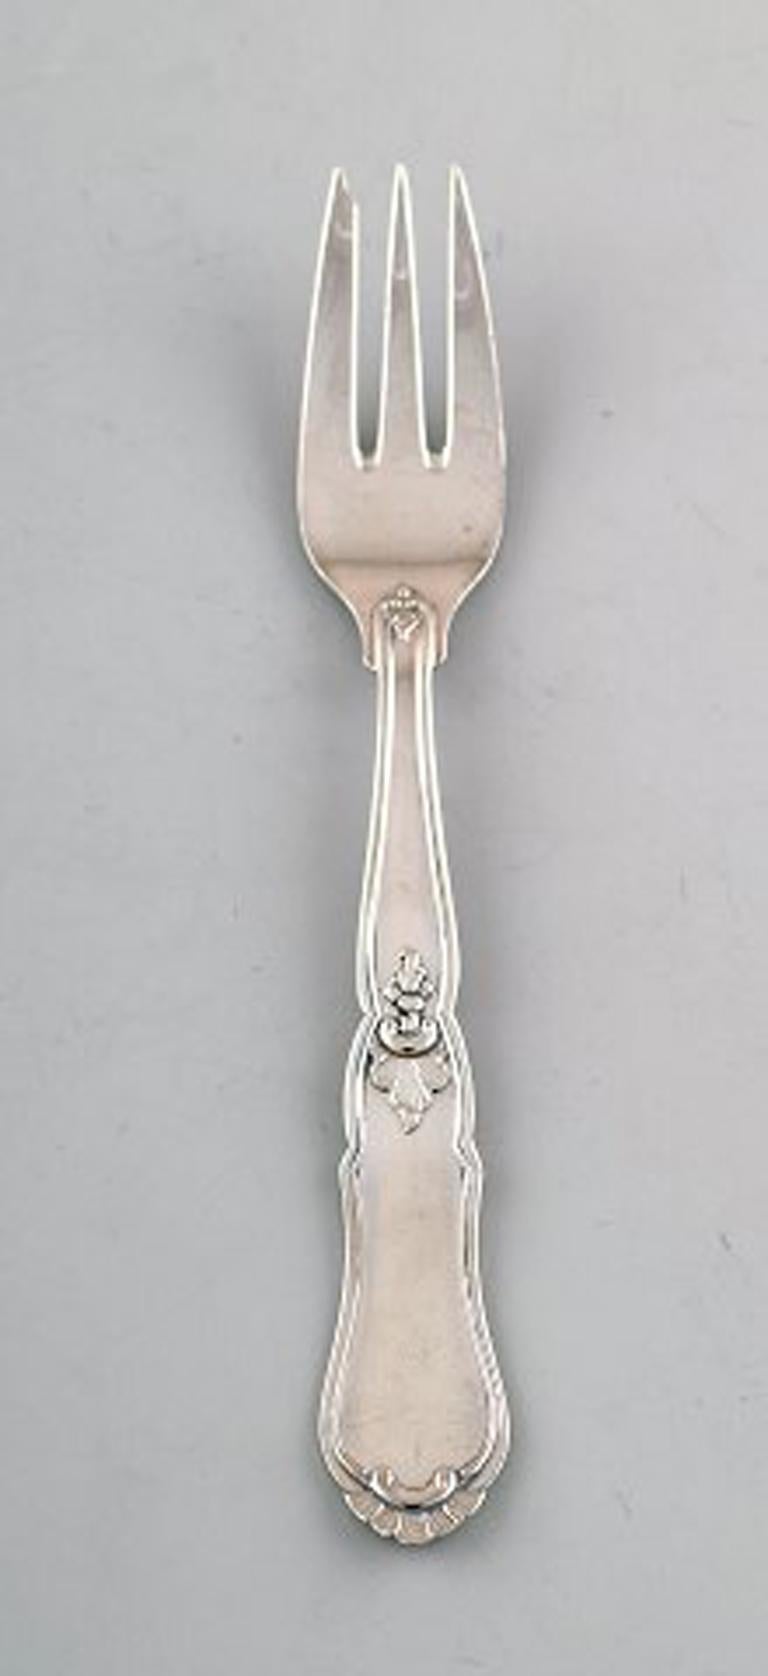 Danish silver, 830. Seven pastry forks, circa 1930
In very good condition.
Stamped: 830S, PF.
Measures: 14.5 cm.